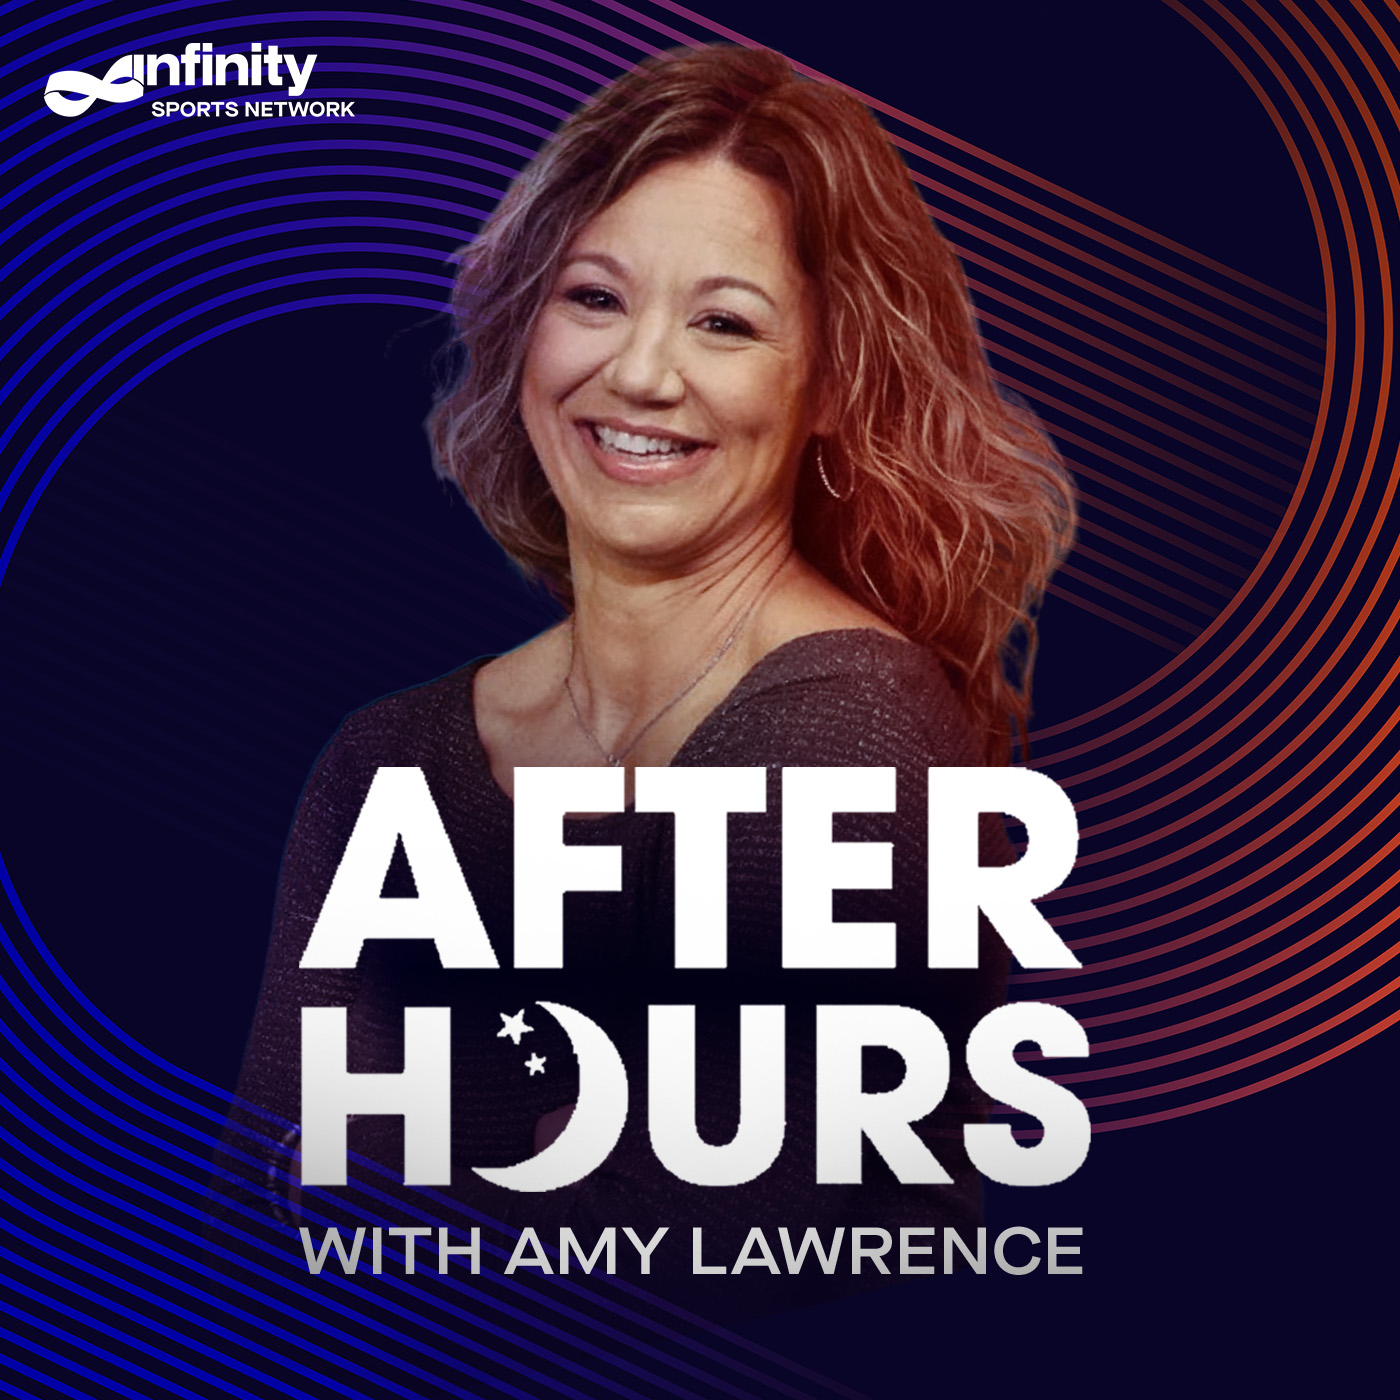 5/28/21 After Hours with Amy Lawrence PODCAST: Hour 1